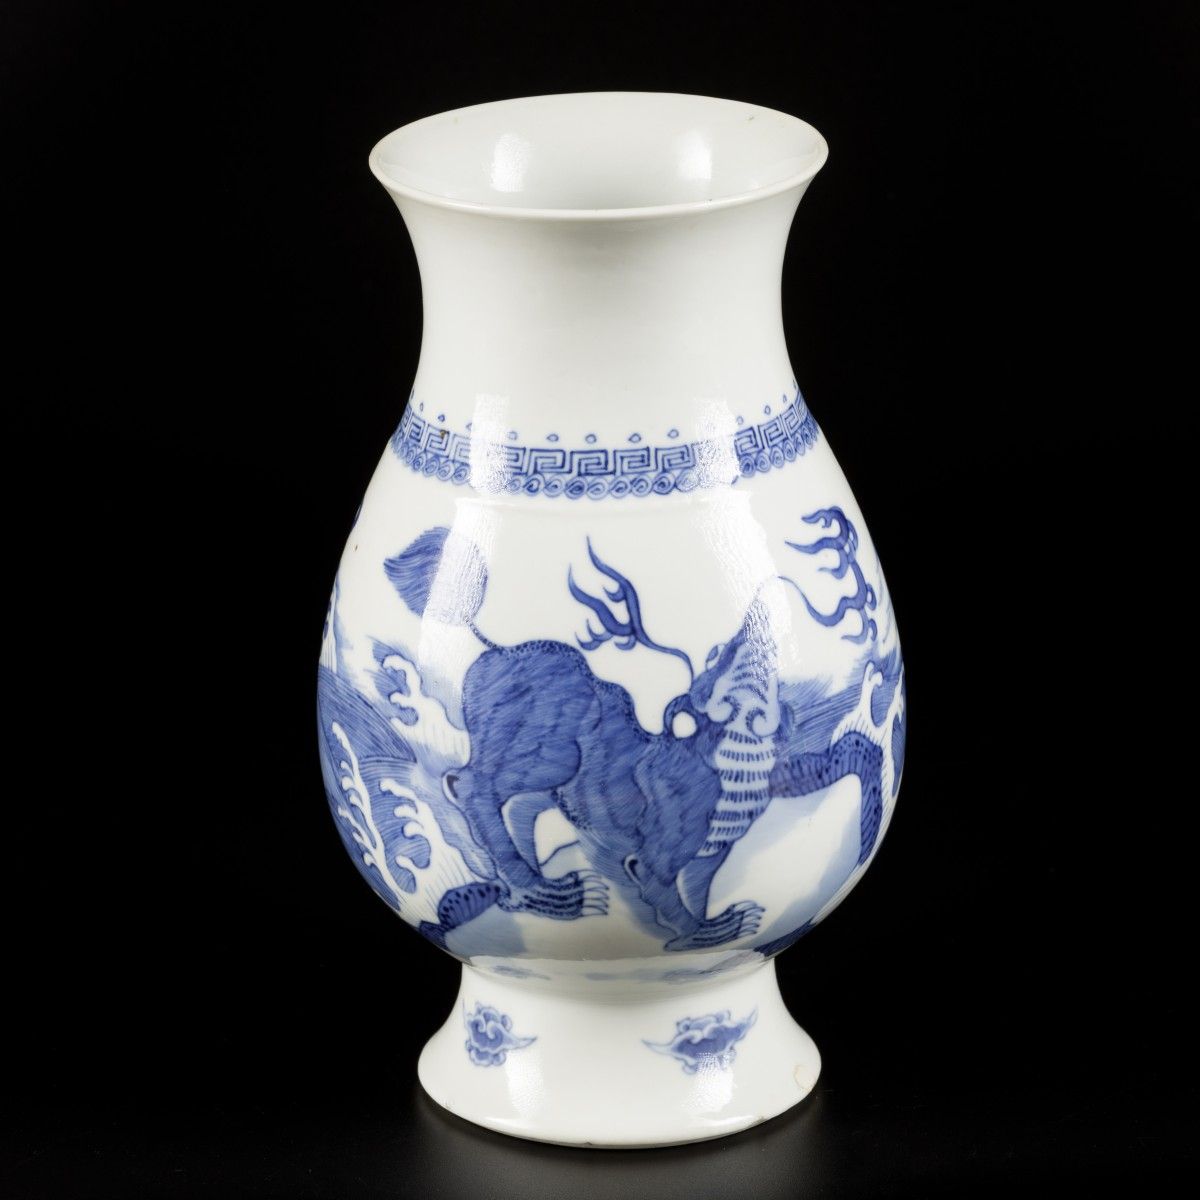 A porcelain vase decorated with foo-dogs, marked Lingzhi, China, 19th century. A&hellip;